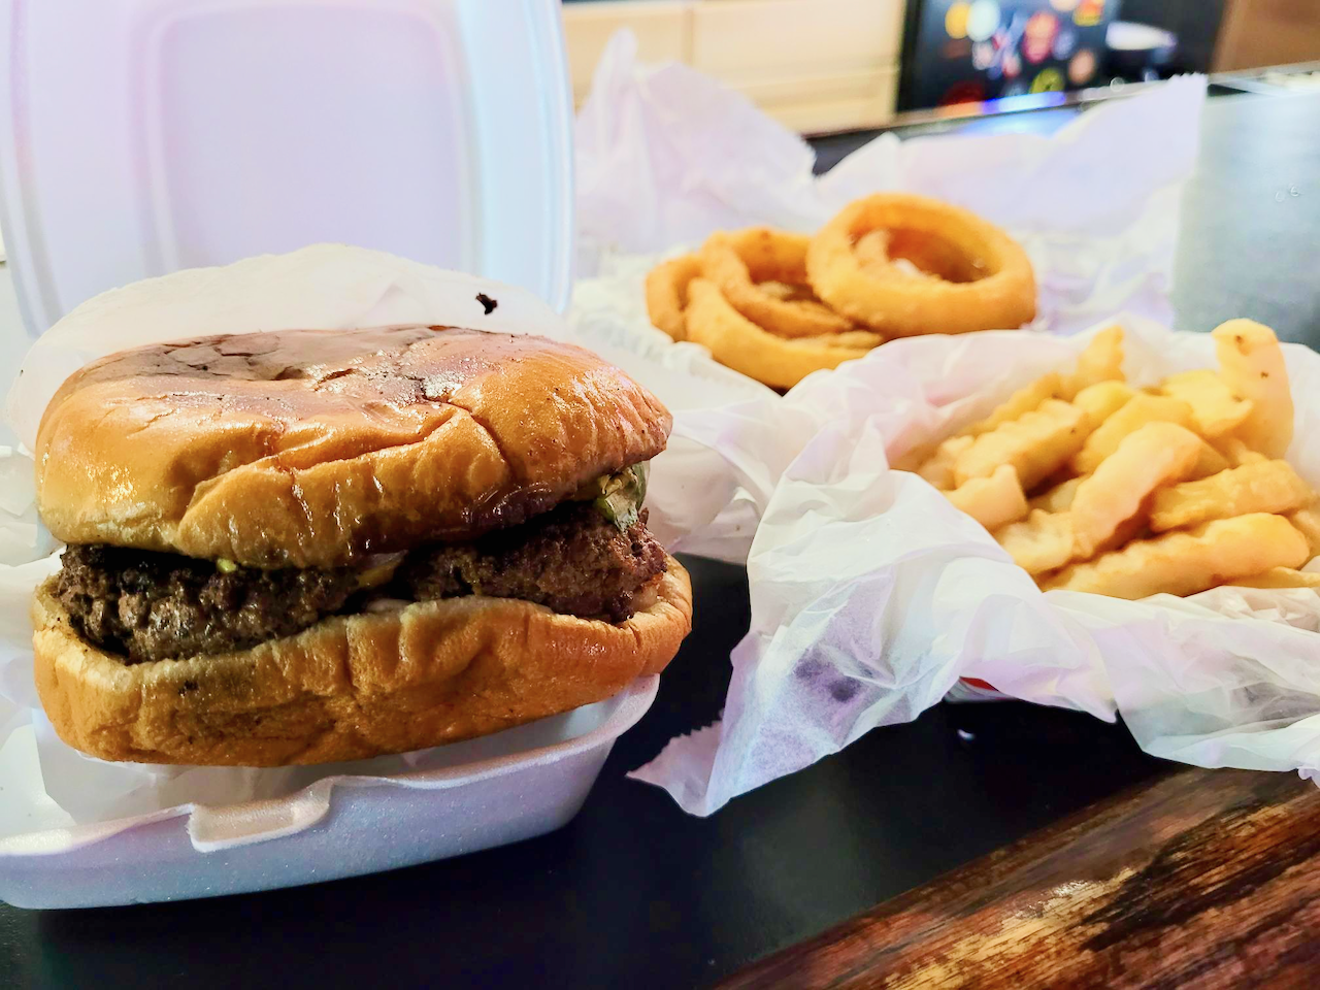 Go for the onion rings instead of fries. Or both.